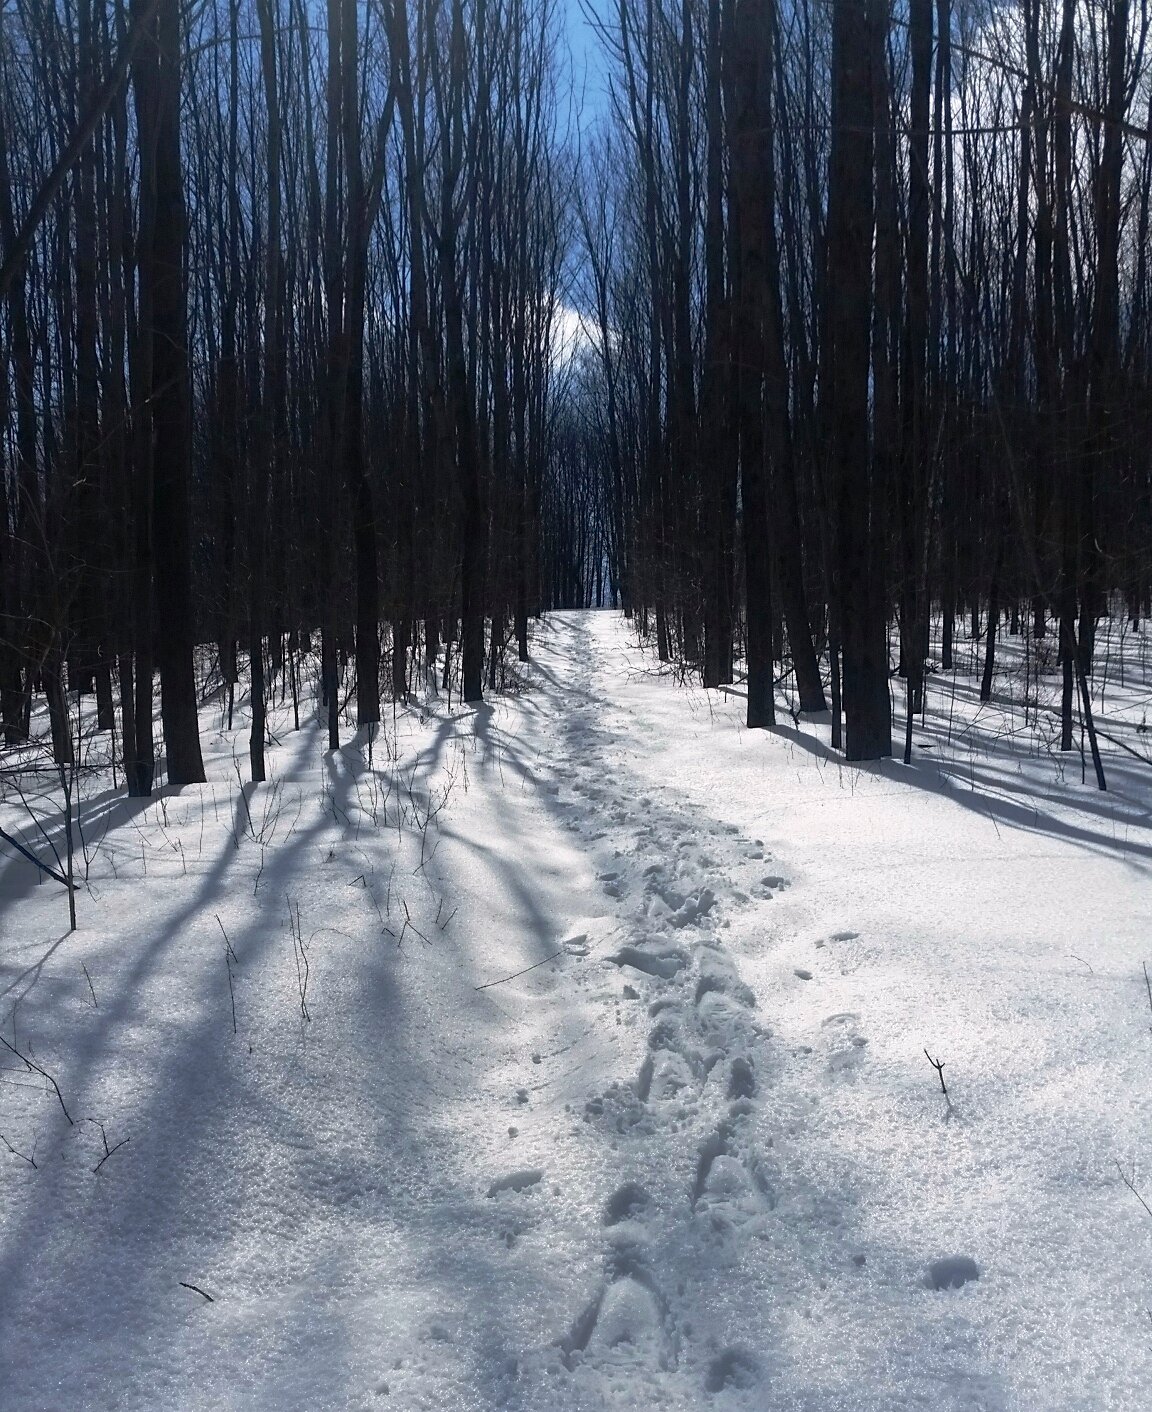 Snowshoe tracks on the snow lead the way on this Walnut Mountain trail.